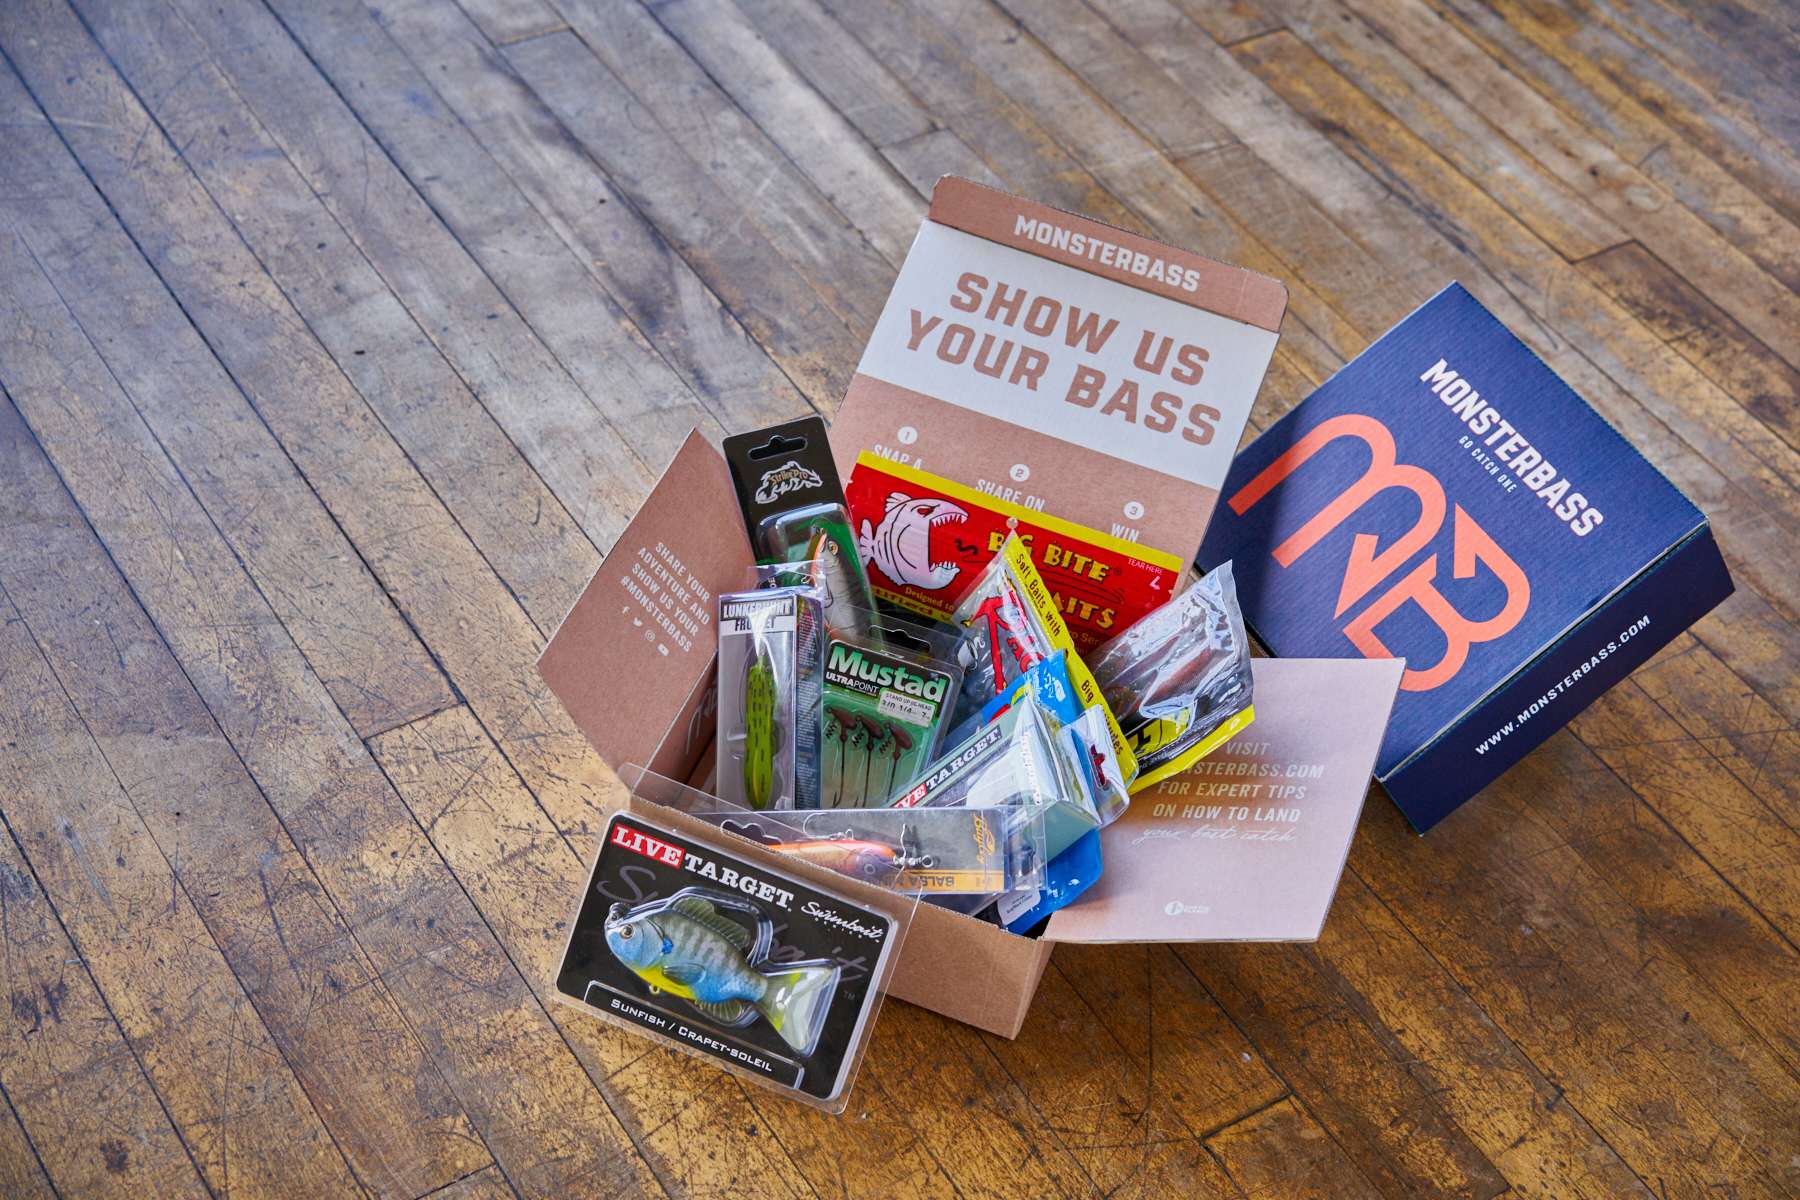 The Best Fishing Subscription Box - MONSTERBASS